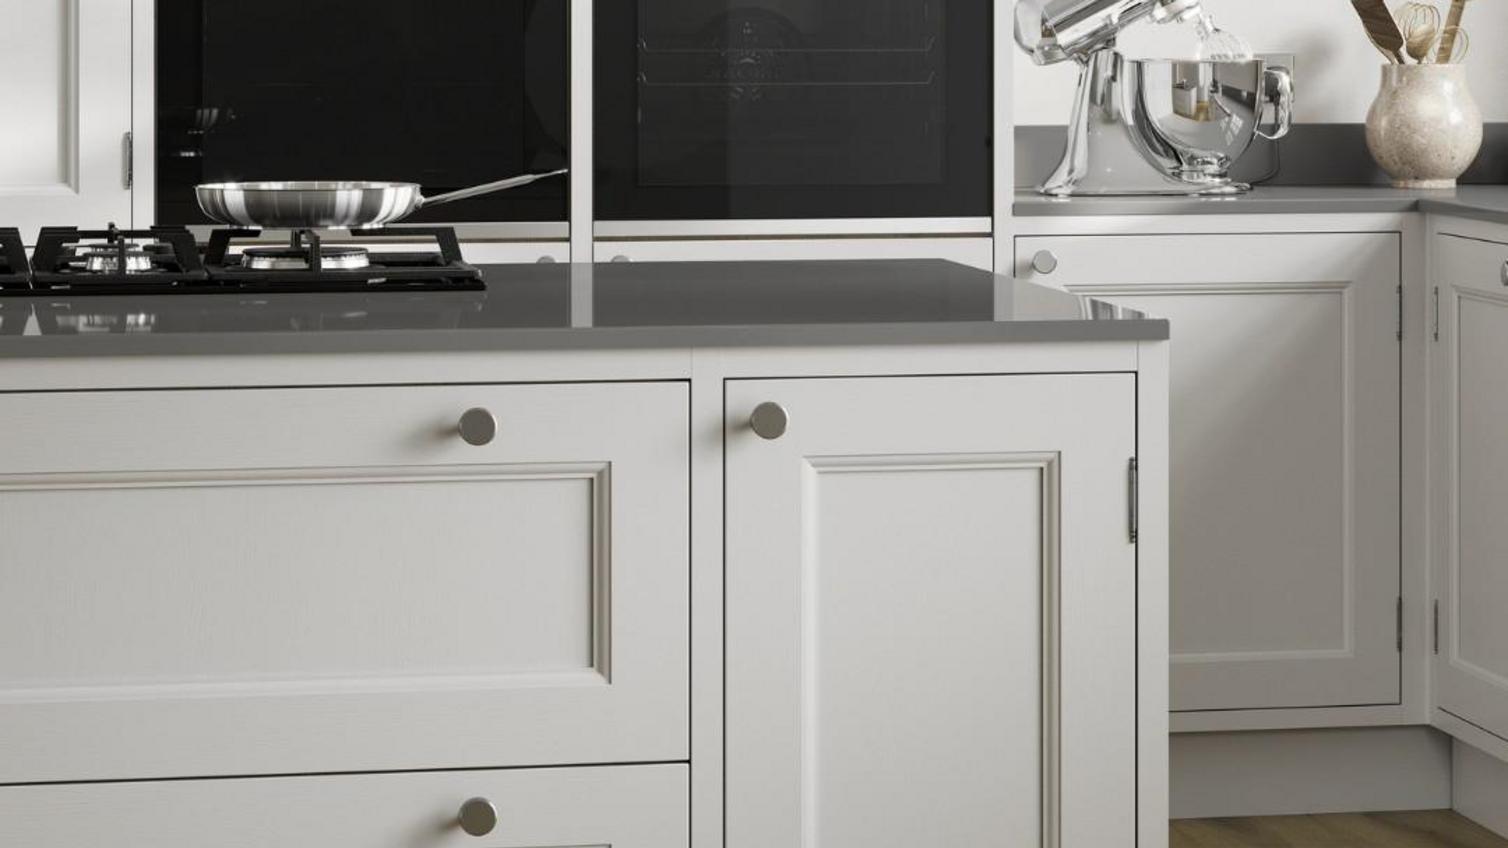 A white, in frame, shaker kitchen in an island design.